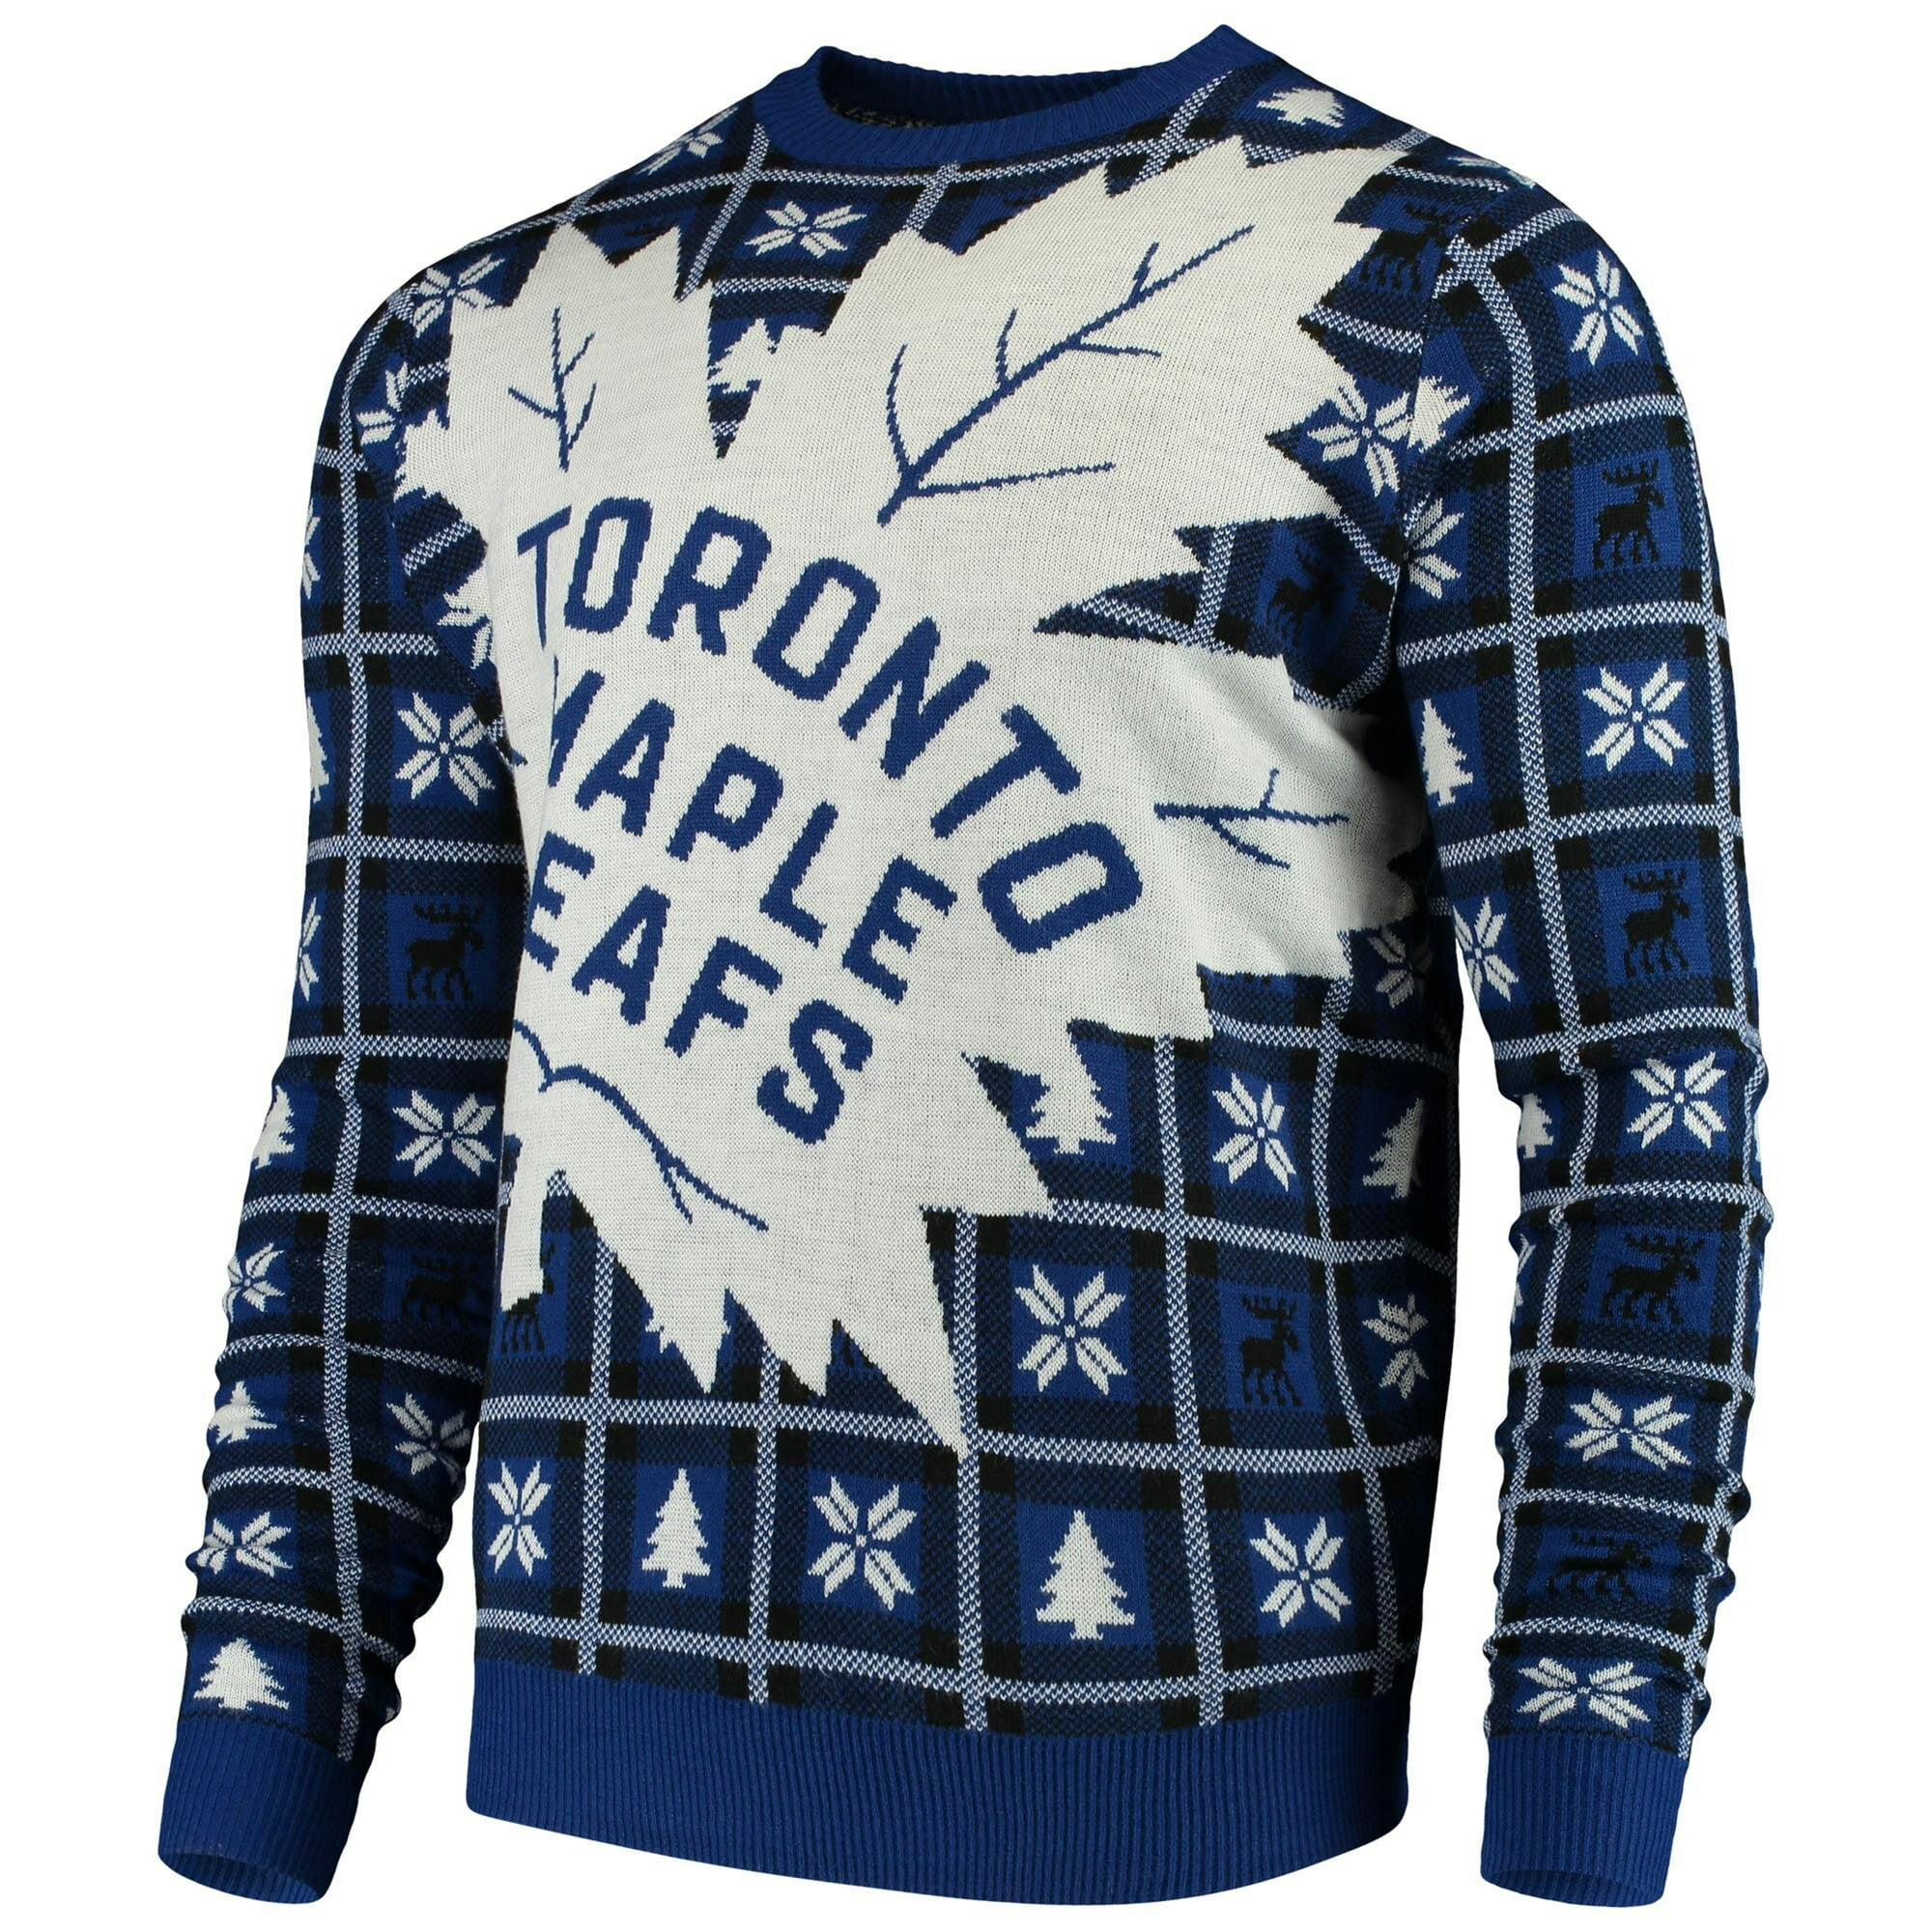 Toronto Maple Leafs Xmas Sweater Alluring Maple Leafs Gift